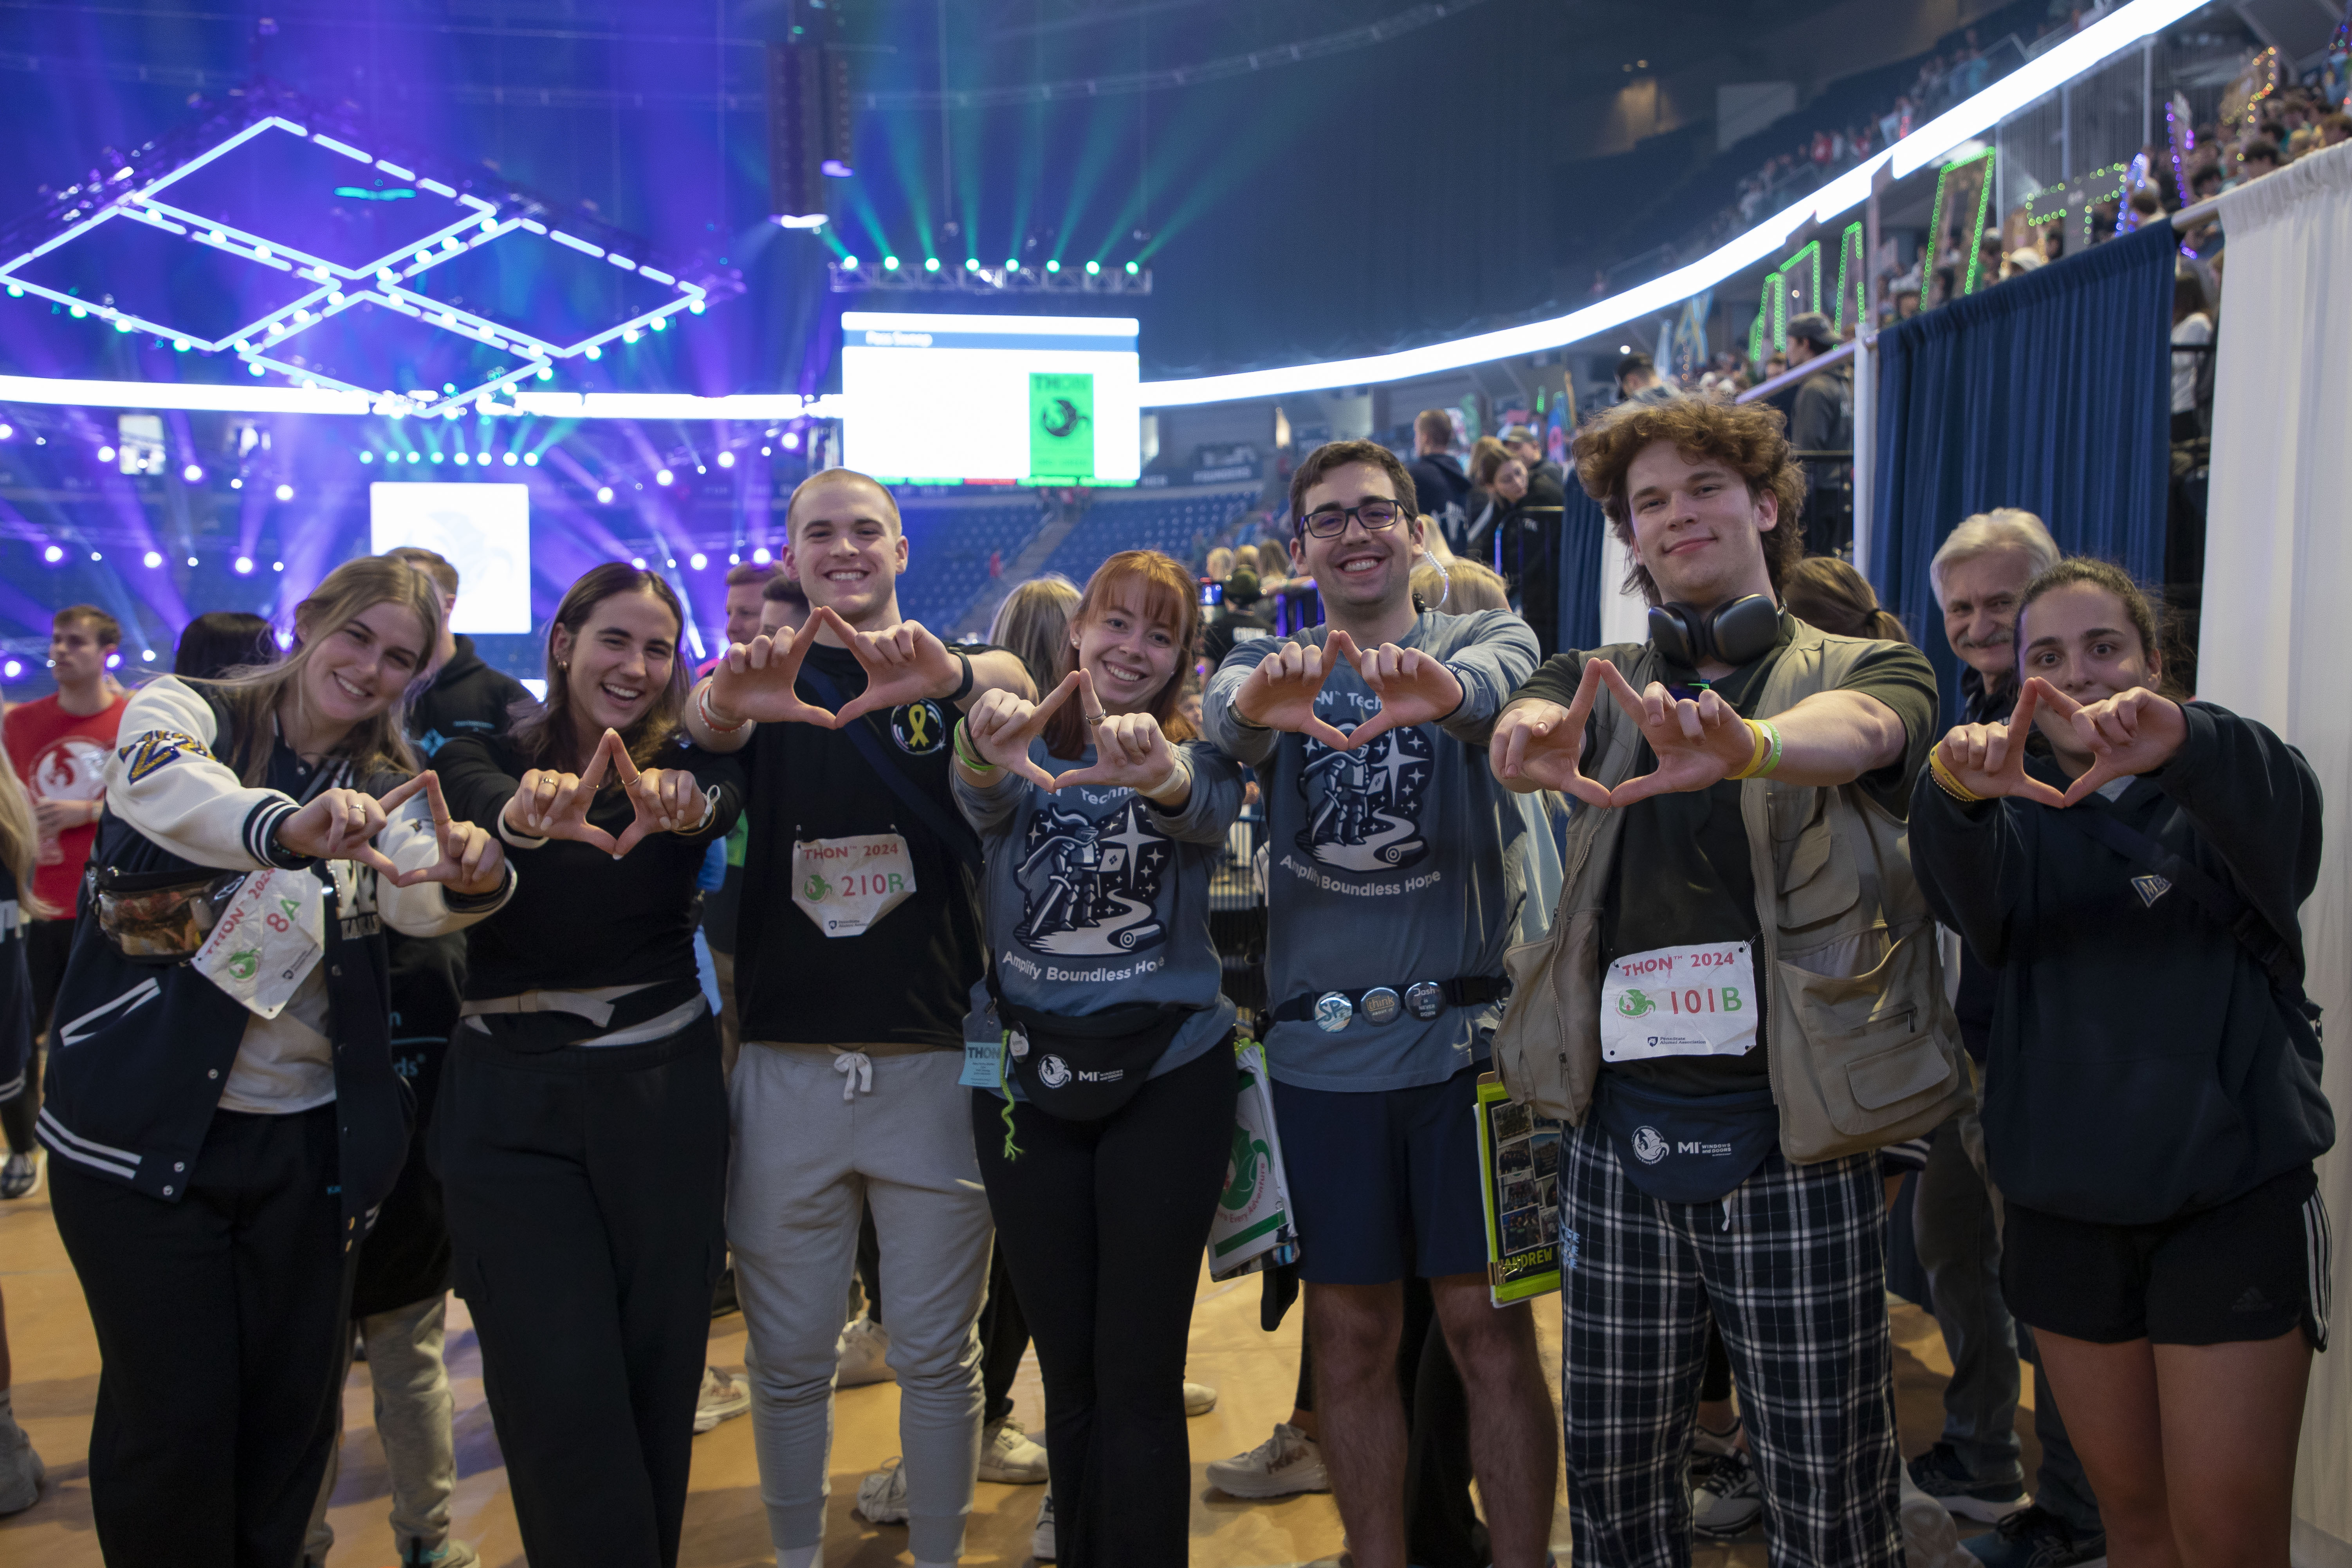 Group photo of IST Students at THON